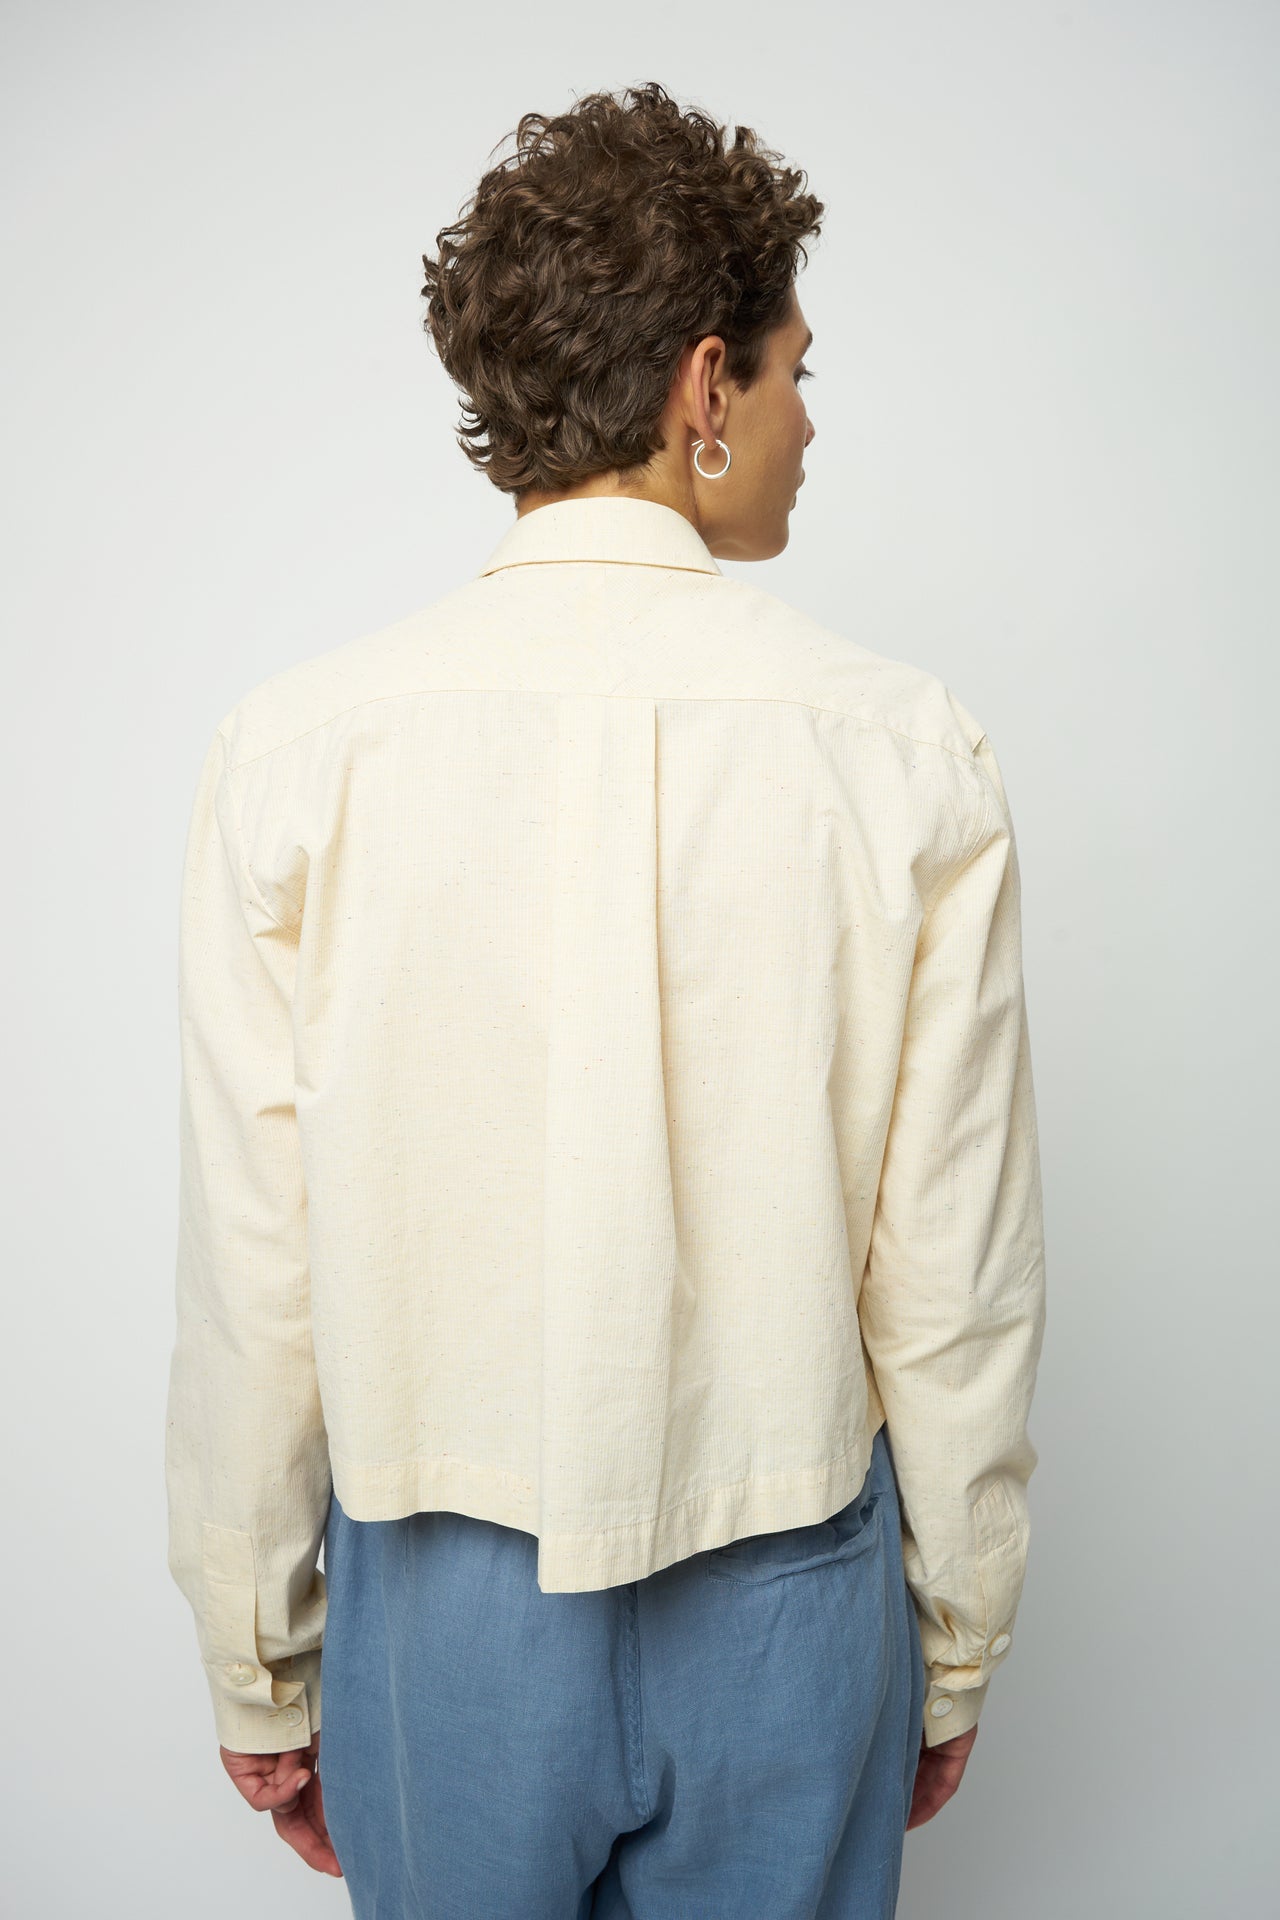 Relaxed Cropped Shirt in a Creamy Yellow White Soft Italian Cotton